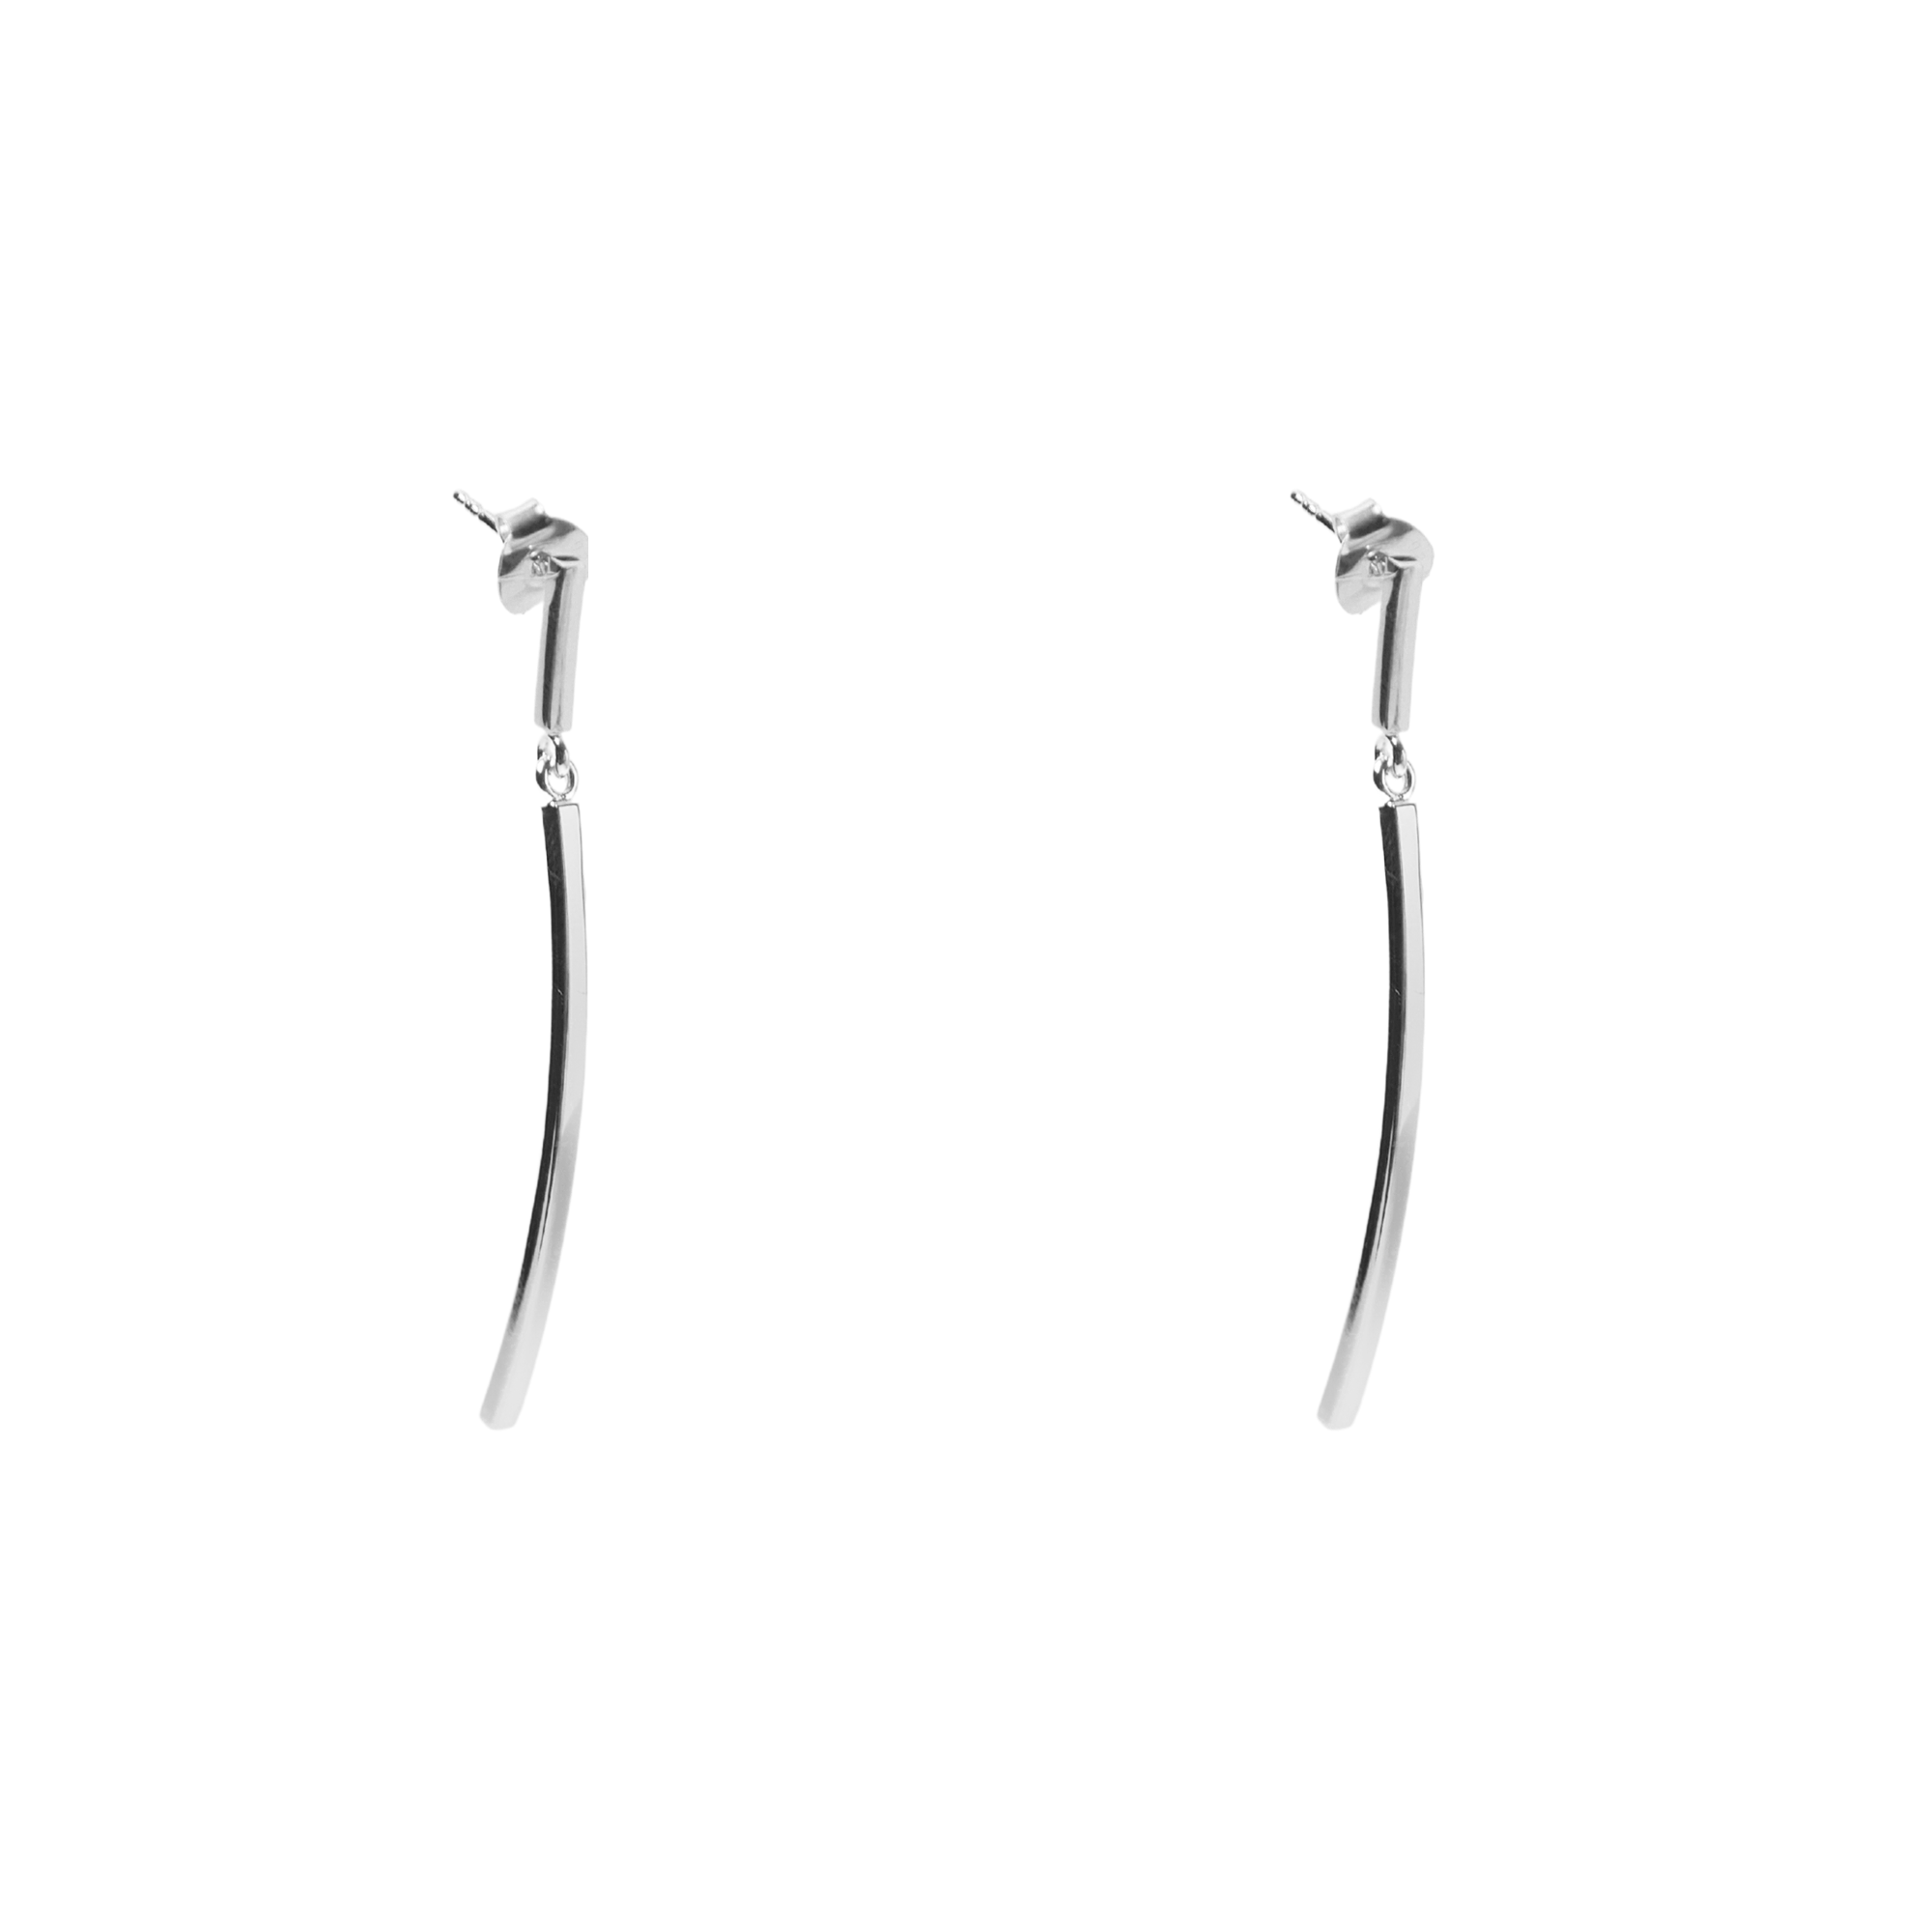 THE CURVED METAL DROP EARRING